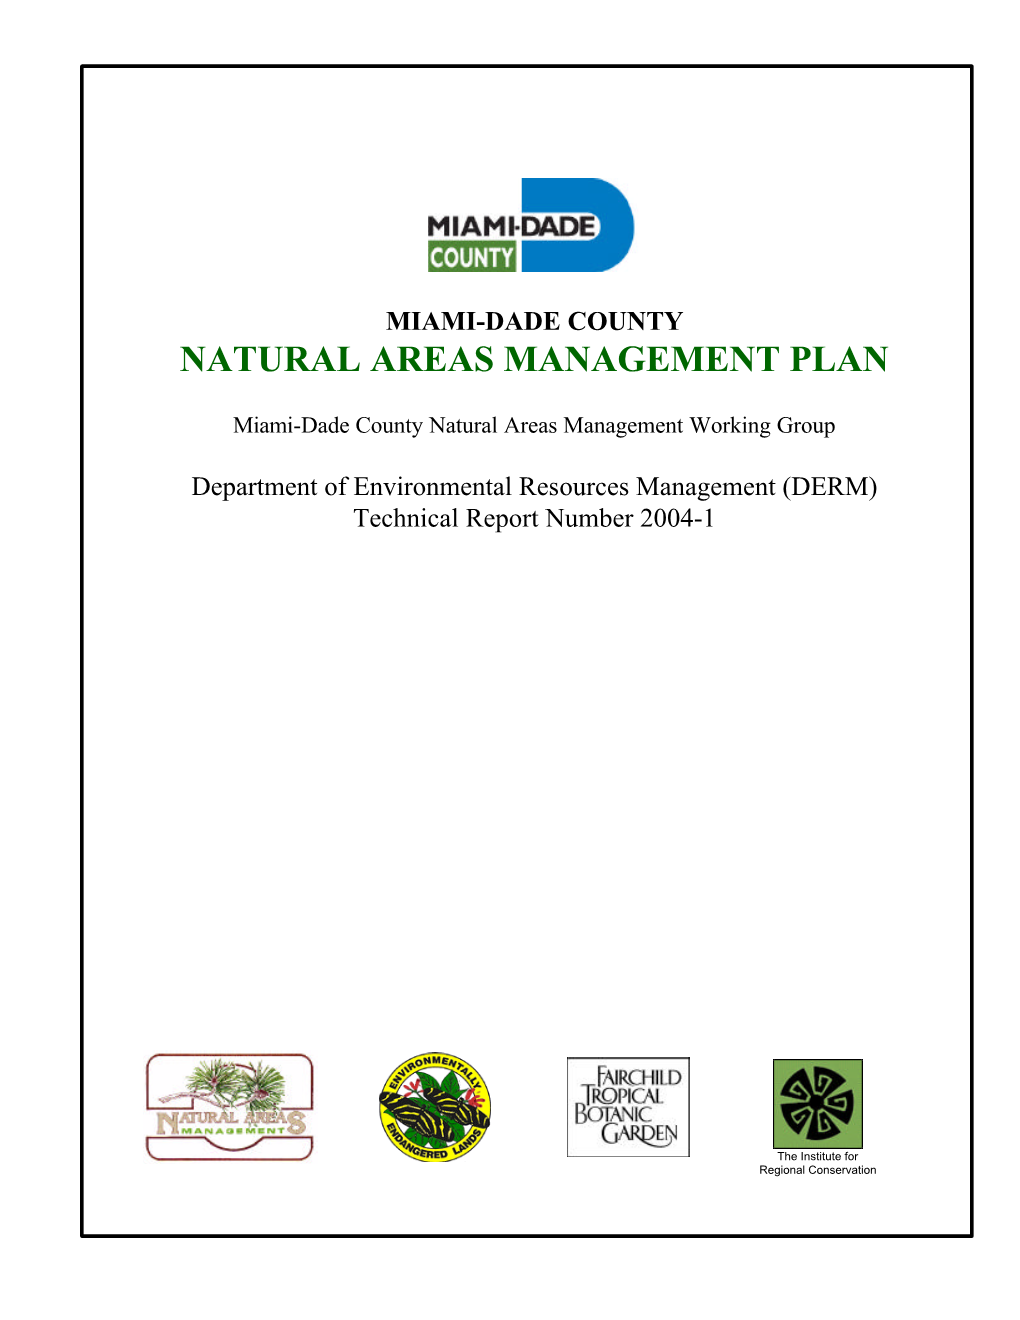 Miami-Dade County Natural Areas Management Plan